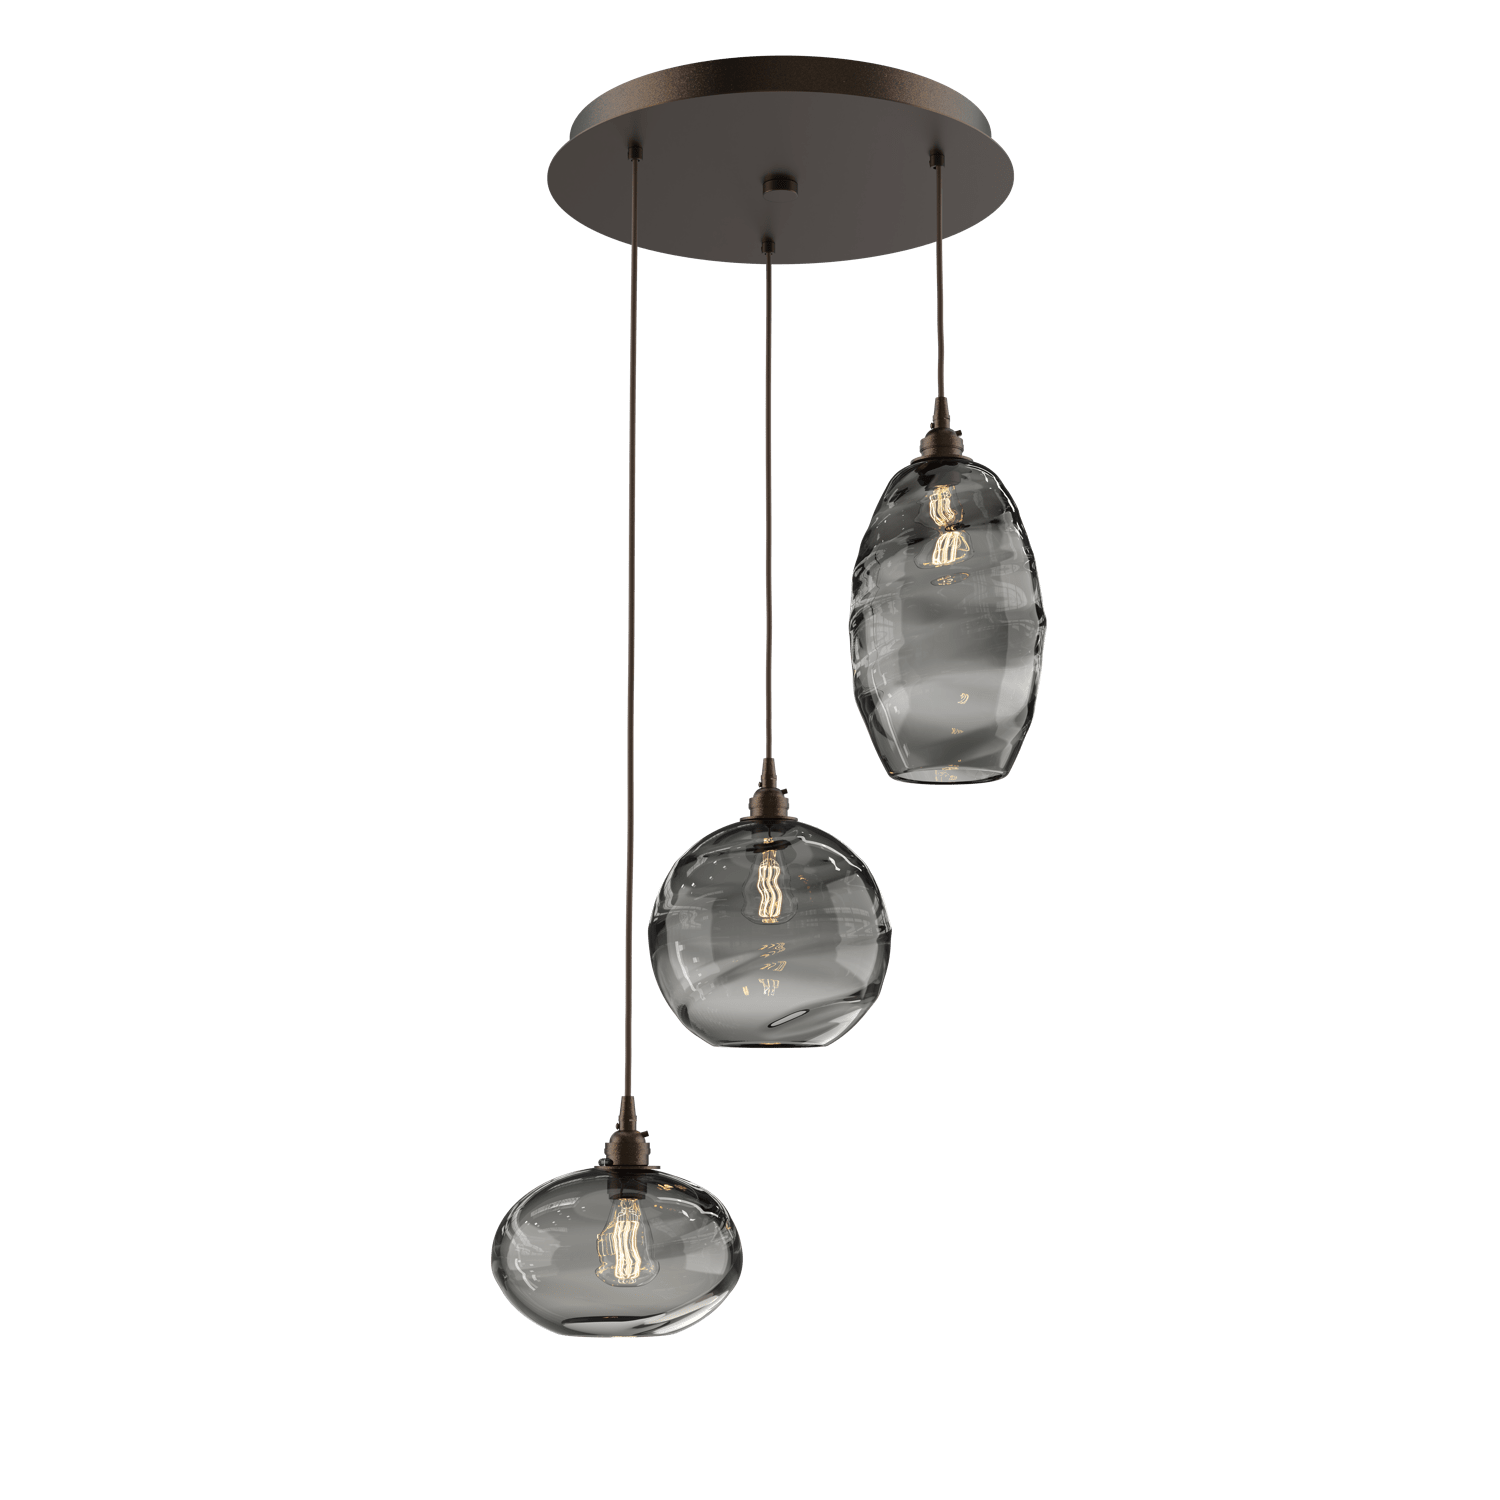 CHB0048-03-FB-OS-Hammerton-Studio-Optic-Blown-Glass-Misto-3-light-round-pendant-chandelier-with-flat-bronze-finish-and-optic-smoke-blown-glass-shades-and-incandescent-lamping